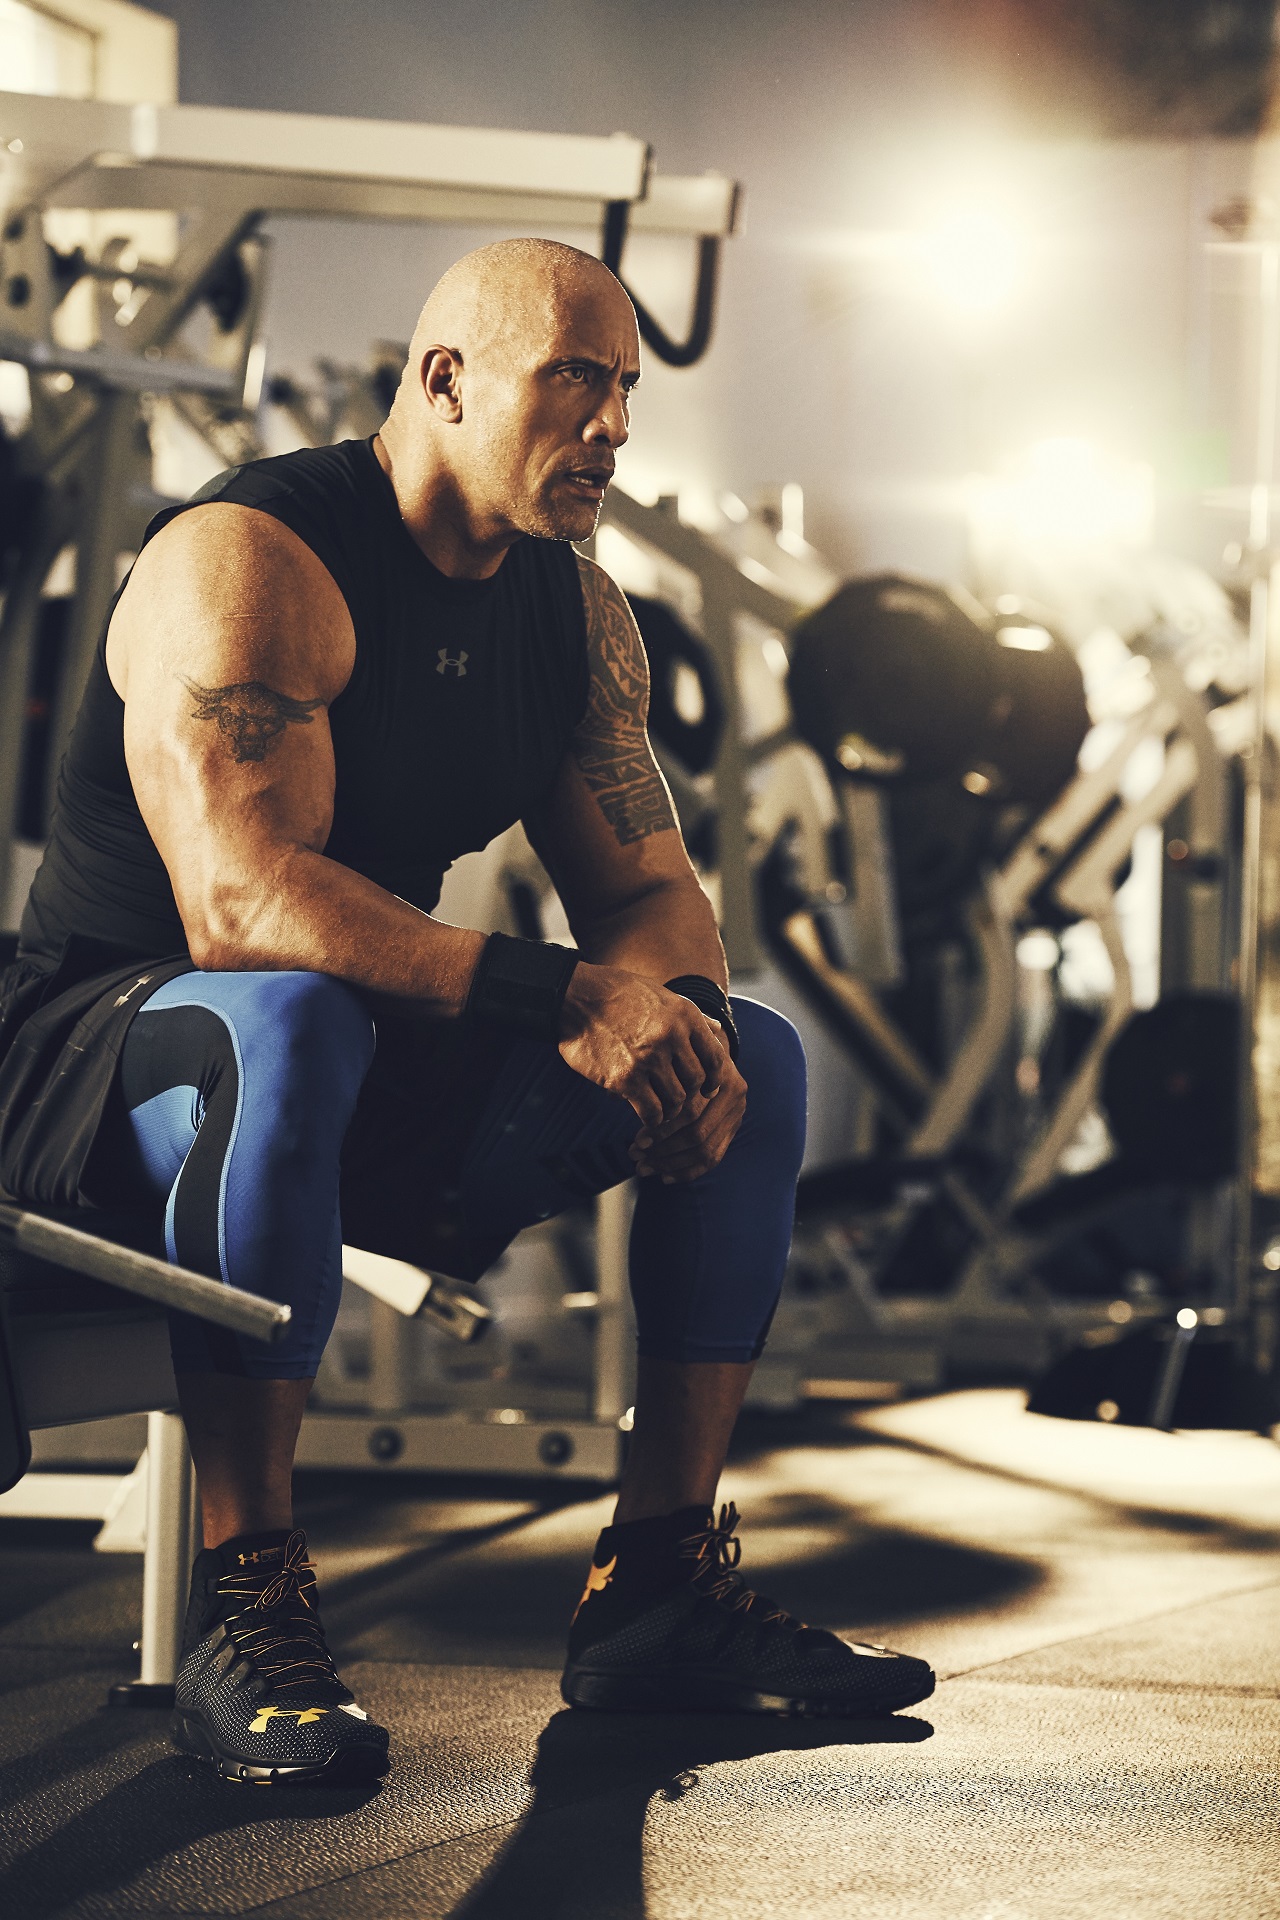 Under Armour officially announces partnership with Dwayne Johnson